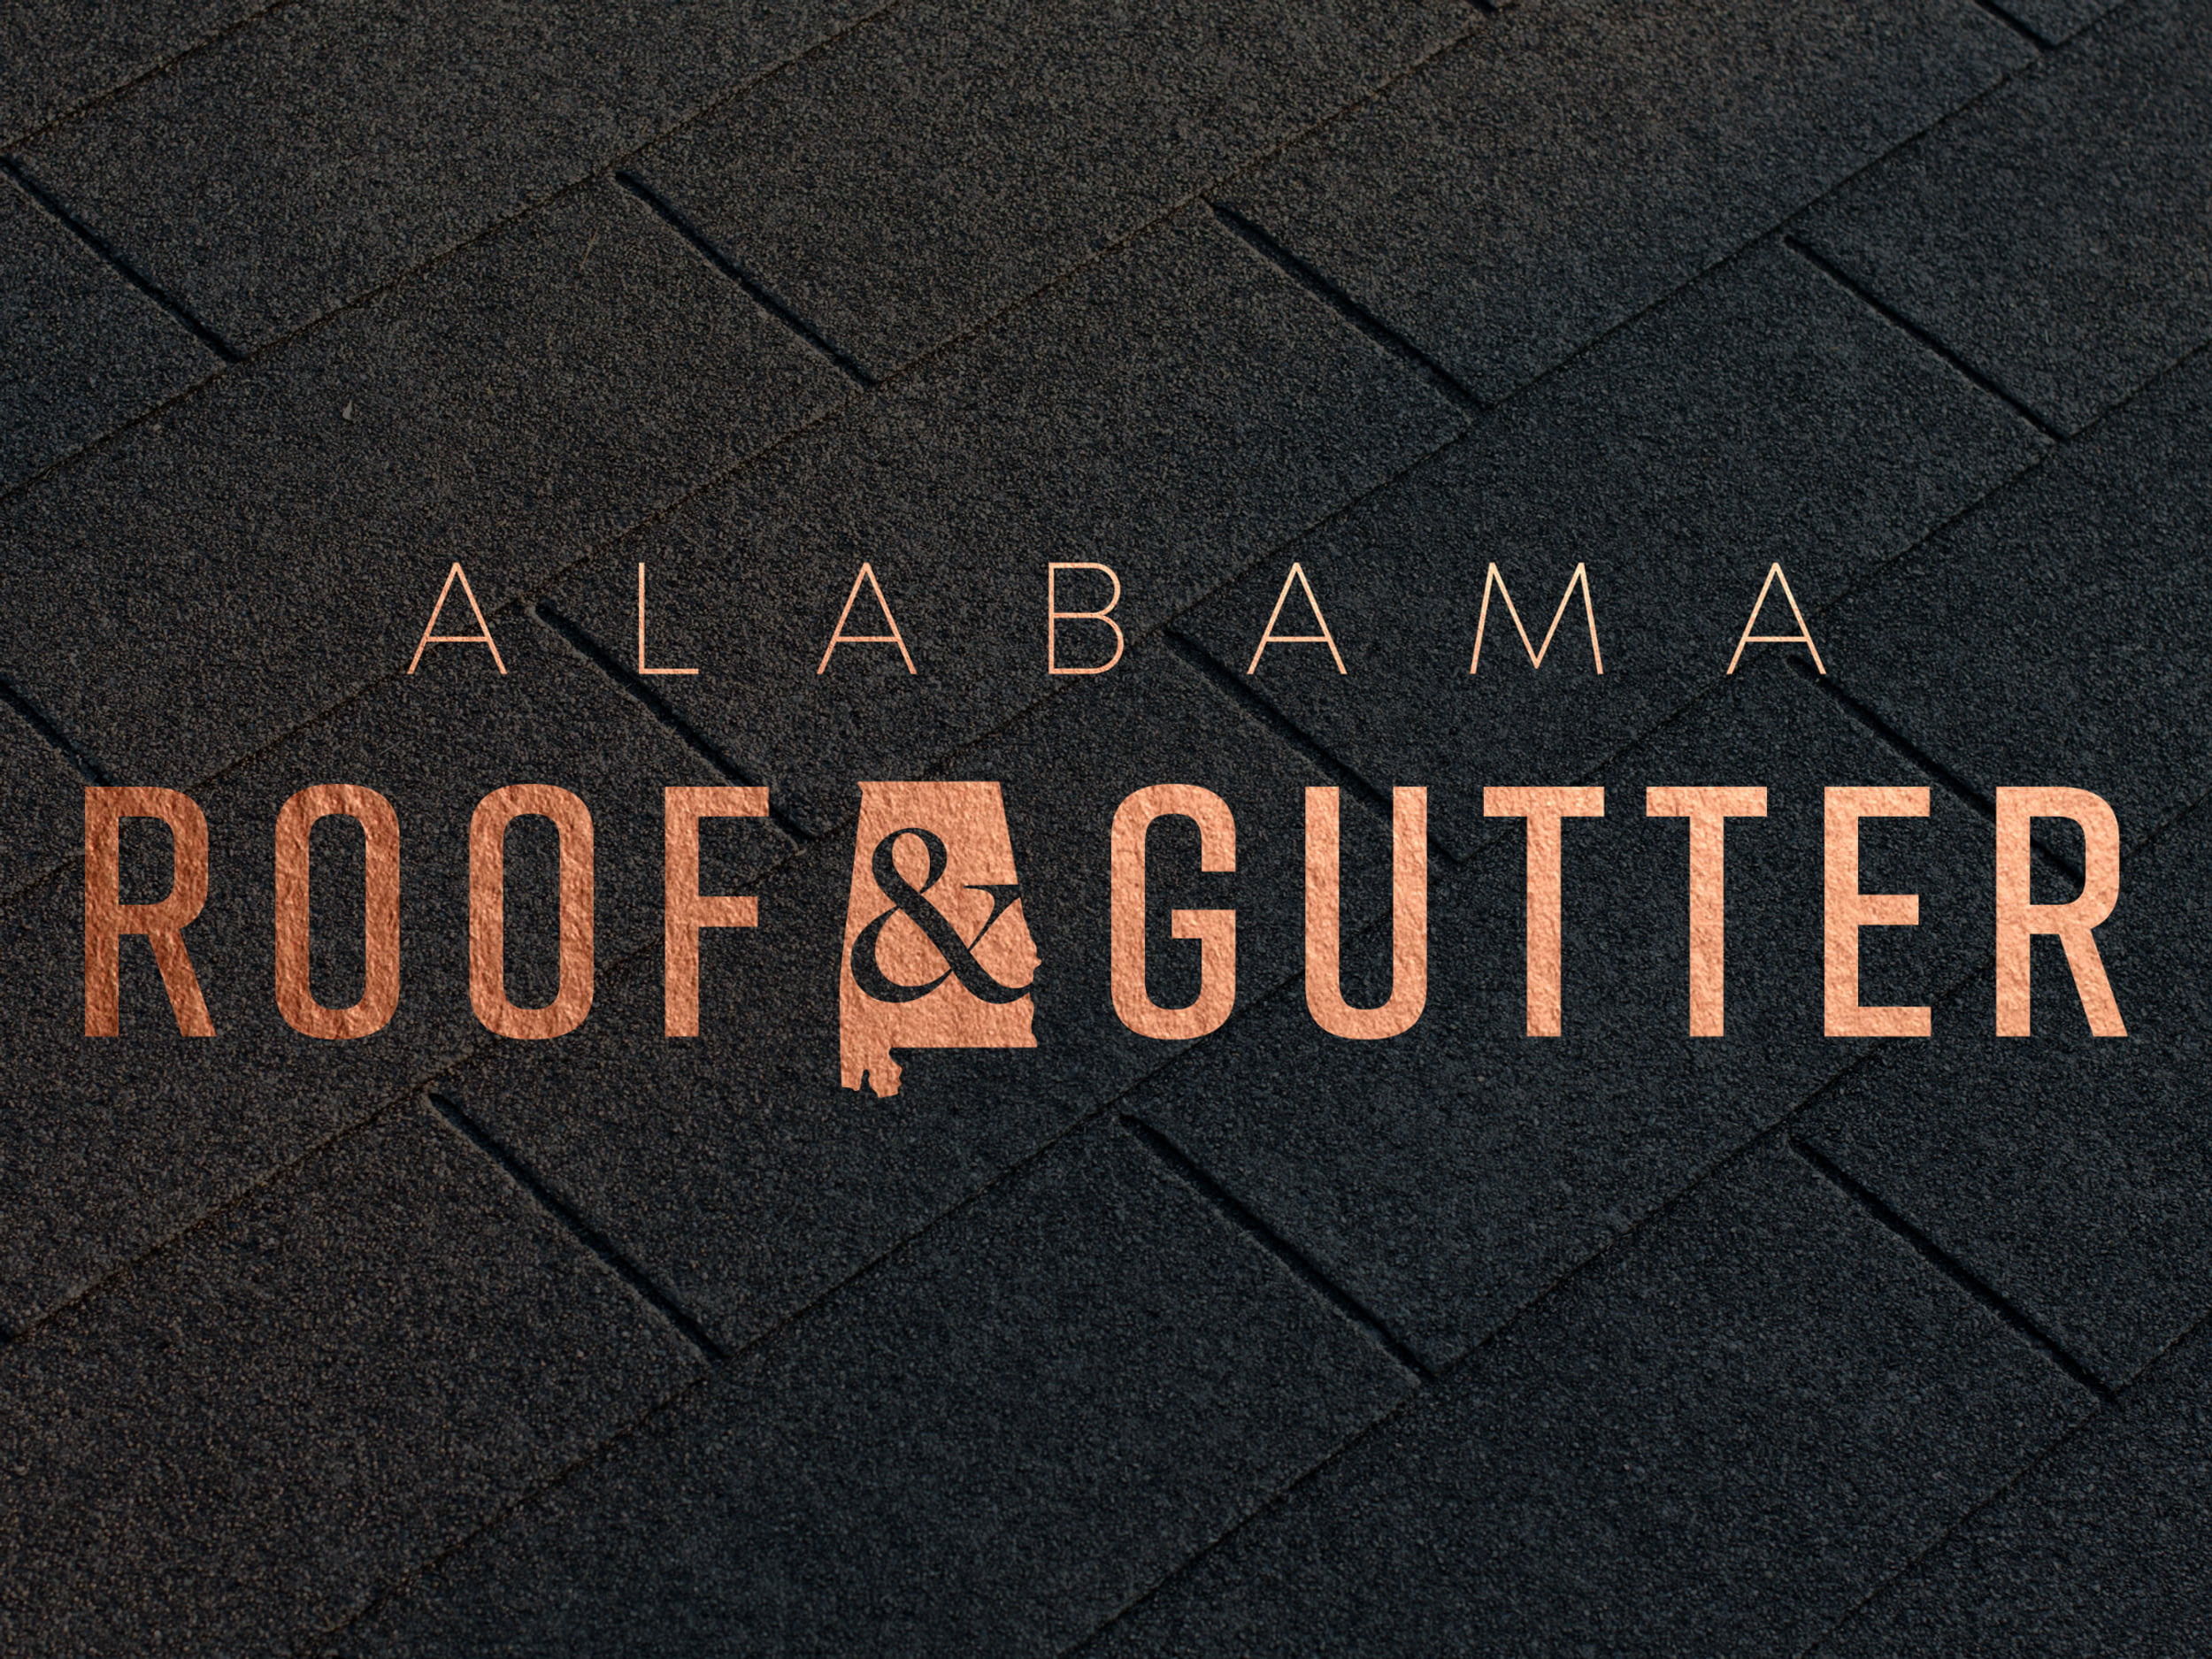 Alabama Roof and Gutter roofing company in Alabama